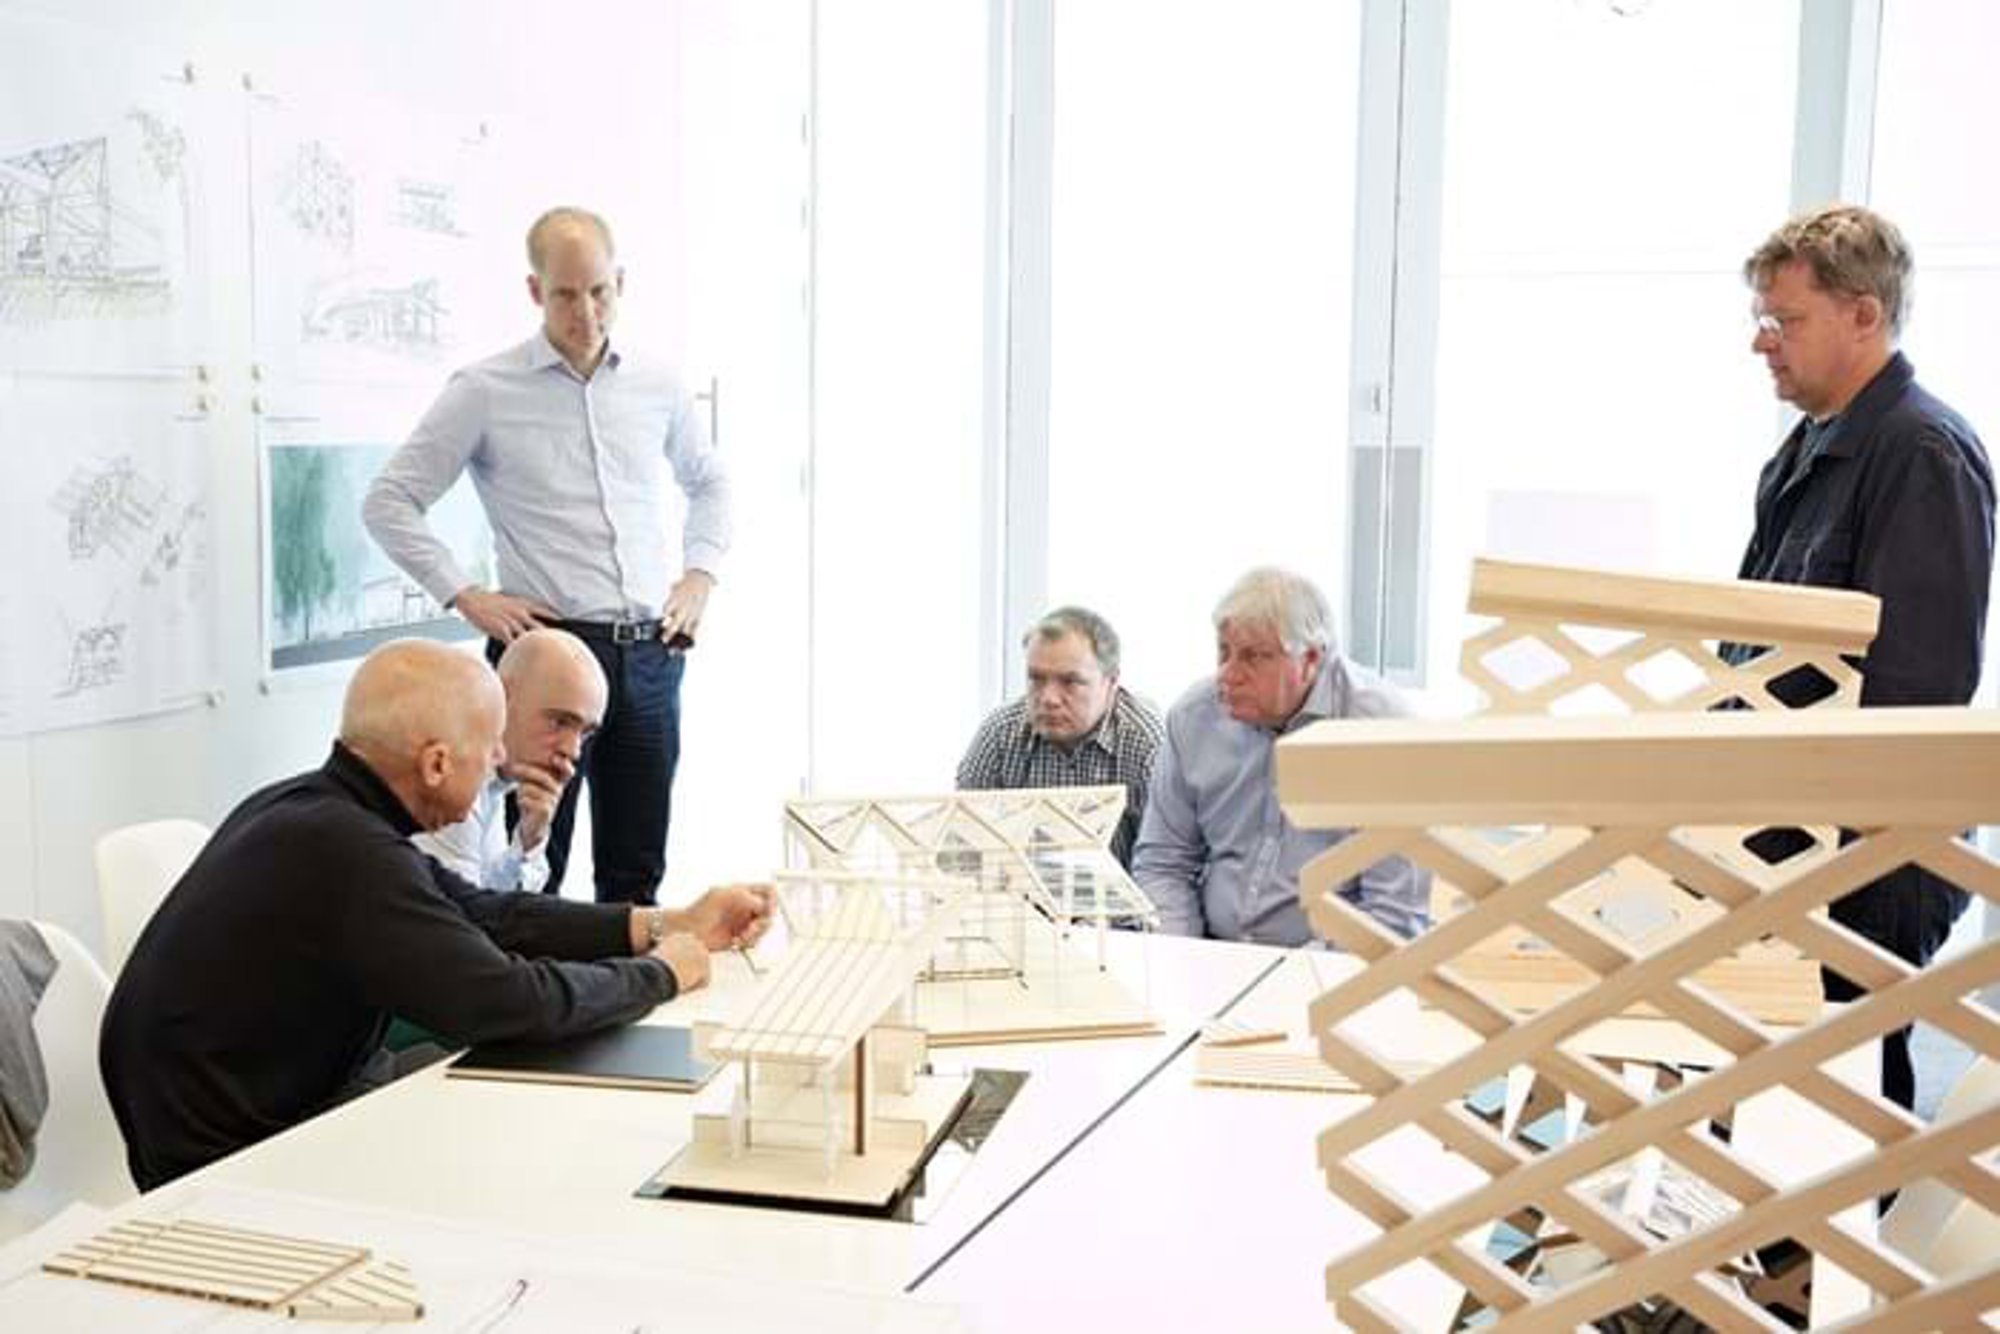 Architects and structural engineers discuss the developing design of Maggie’s Manchester. From left to right: Norman Foster, Diego Alejandro Teixeira Seisdedos, Roger Ridsdill Smith, Darron Haylock, David Nelson, Stefan Behling. © Aaron Hargreaves / Foster + Partners